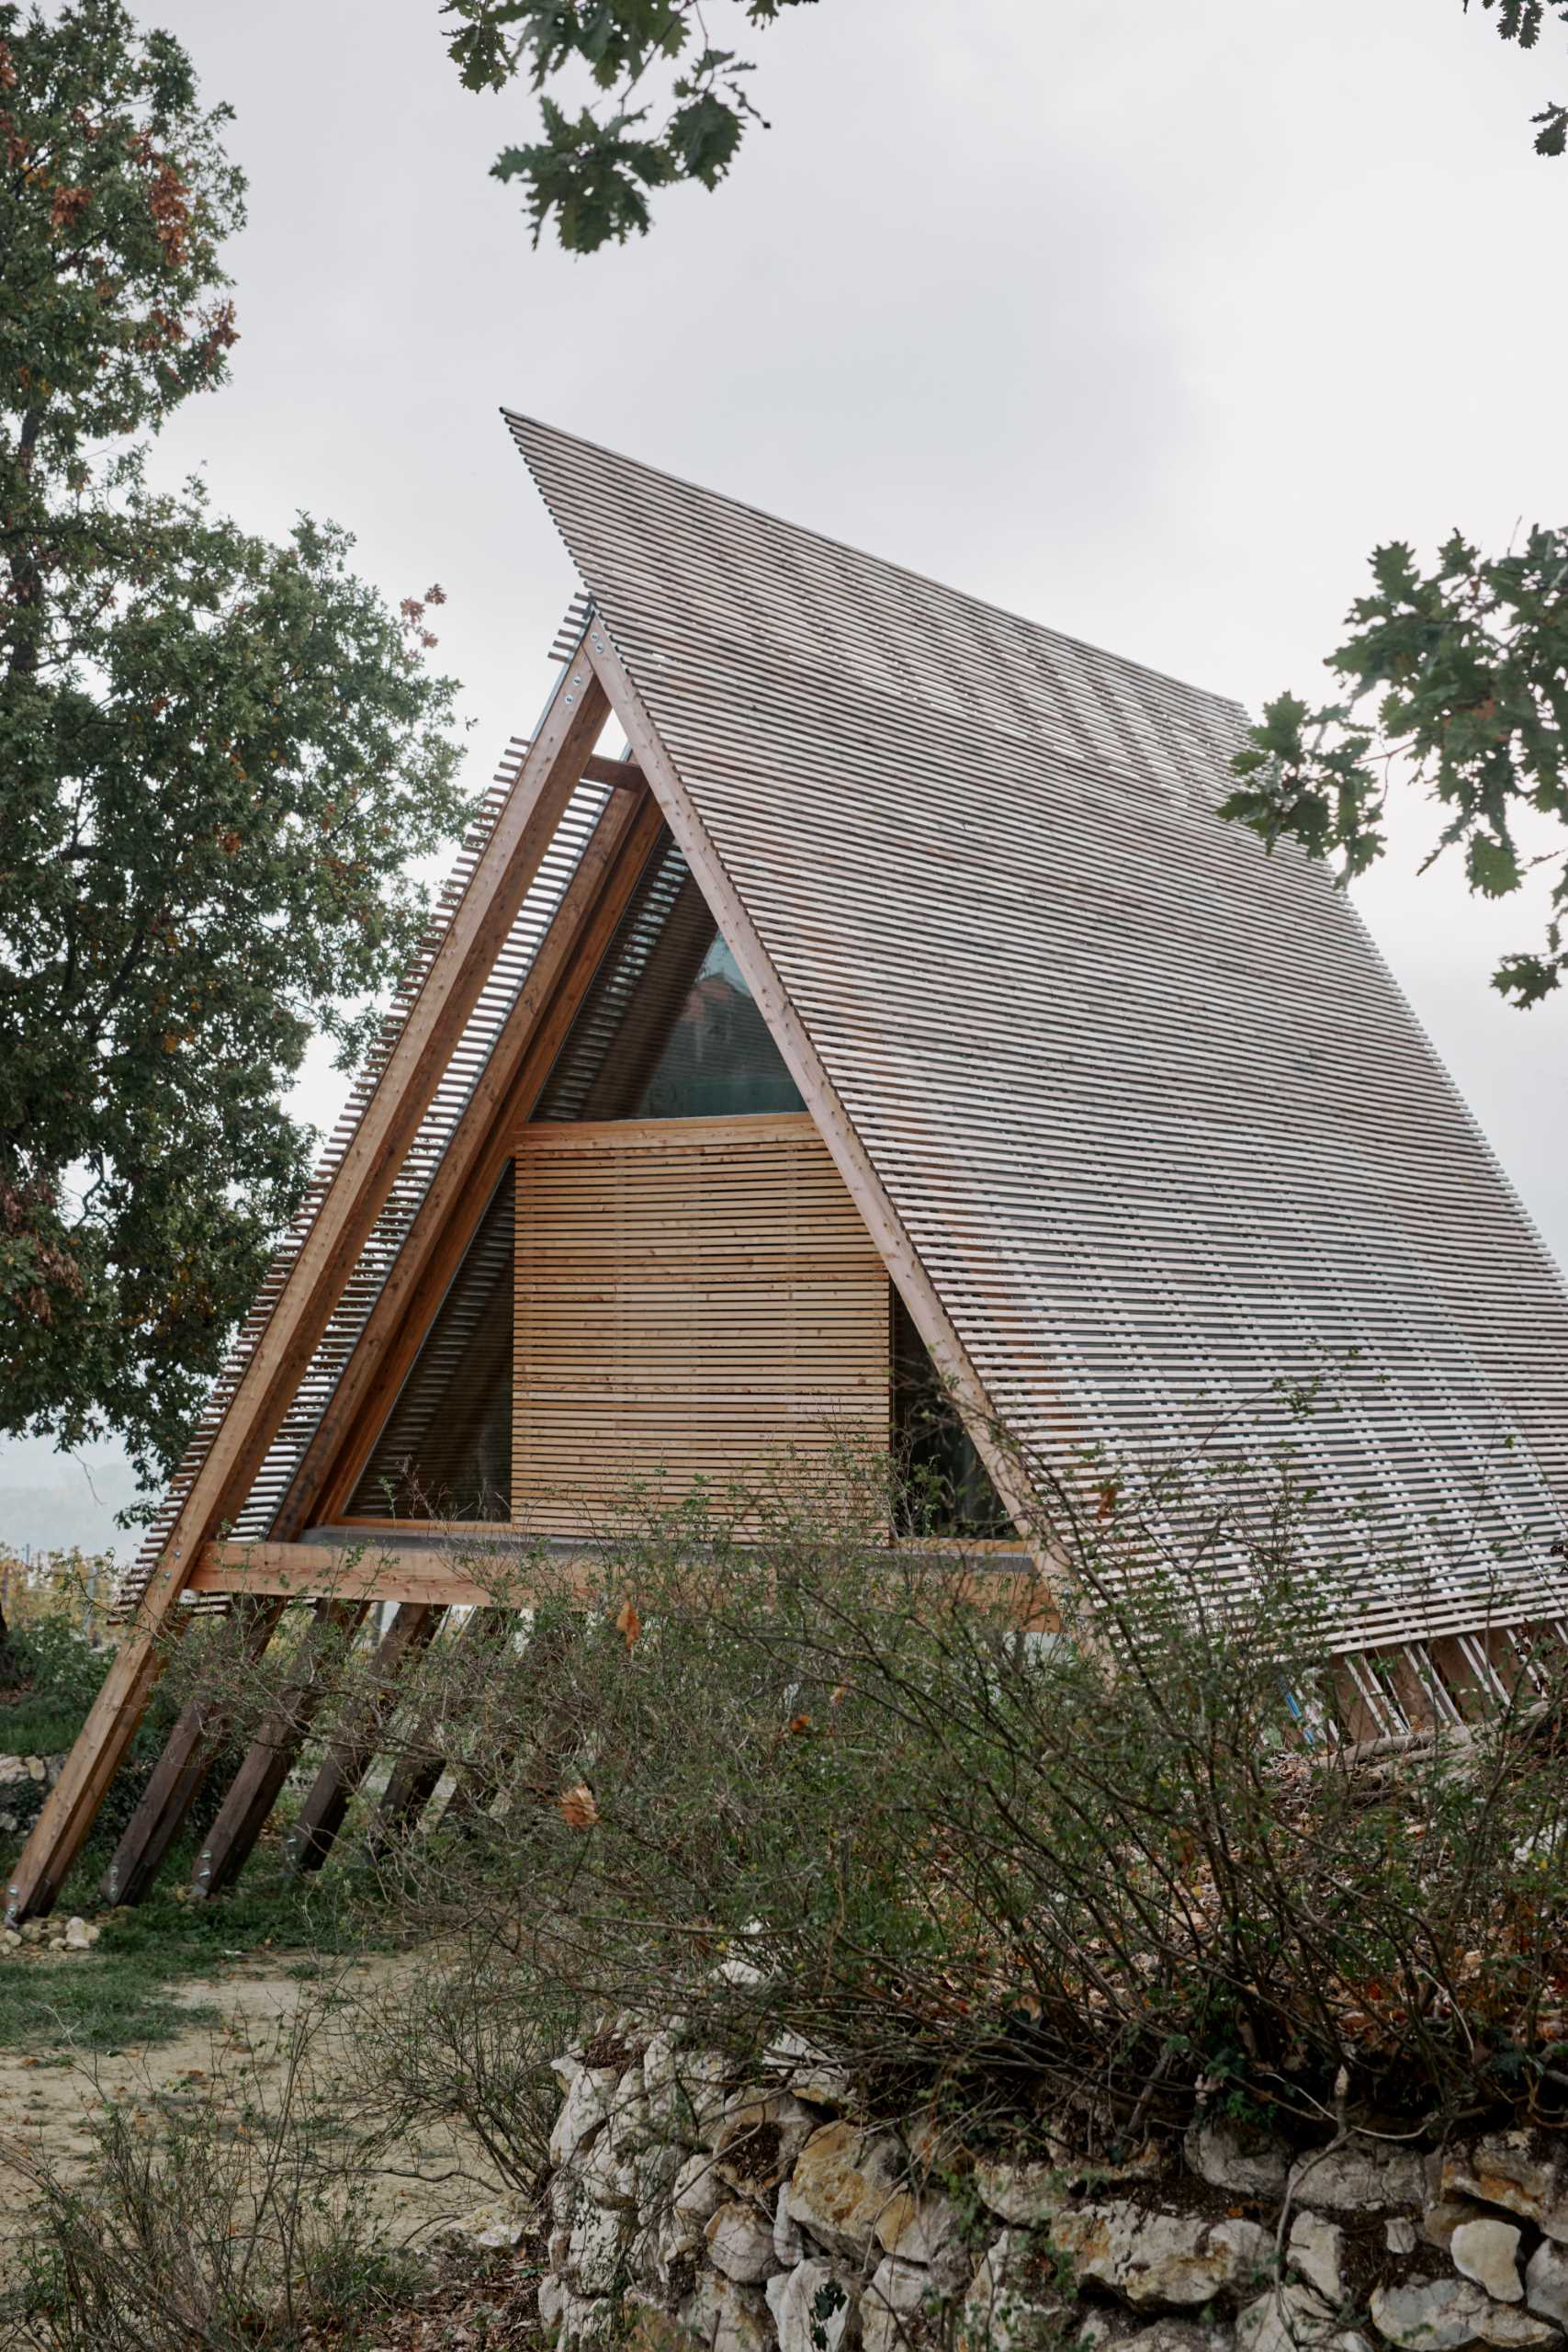 This modern A-frame cabin is made of larch treated only with oil, a natural element that’s absorbed into the wood,  enriching and nourishing it as it ages.